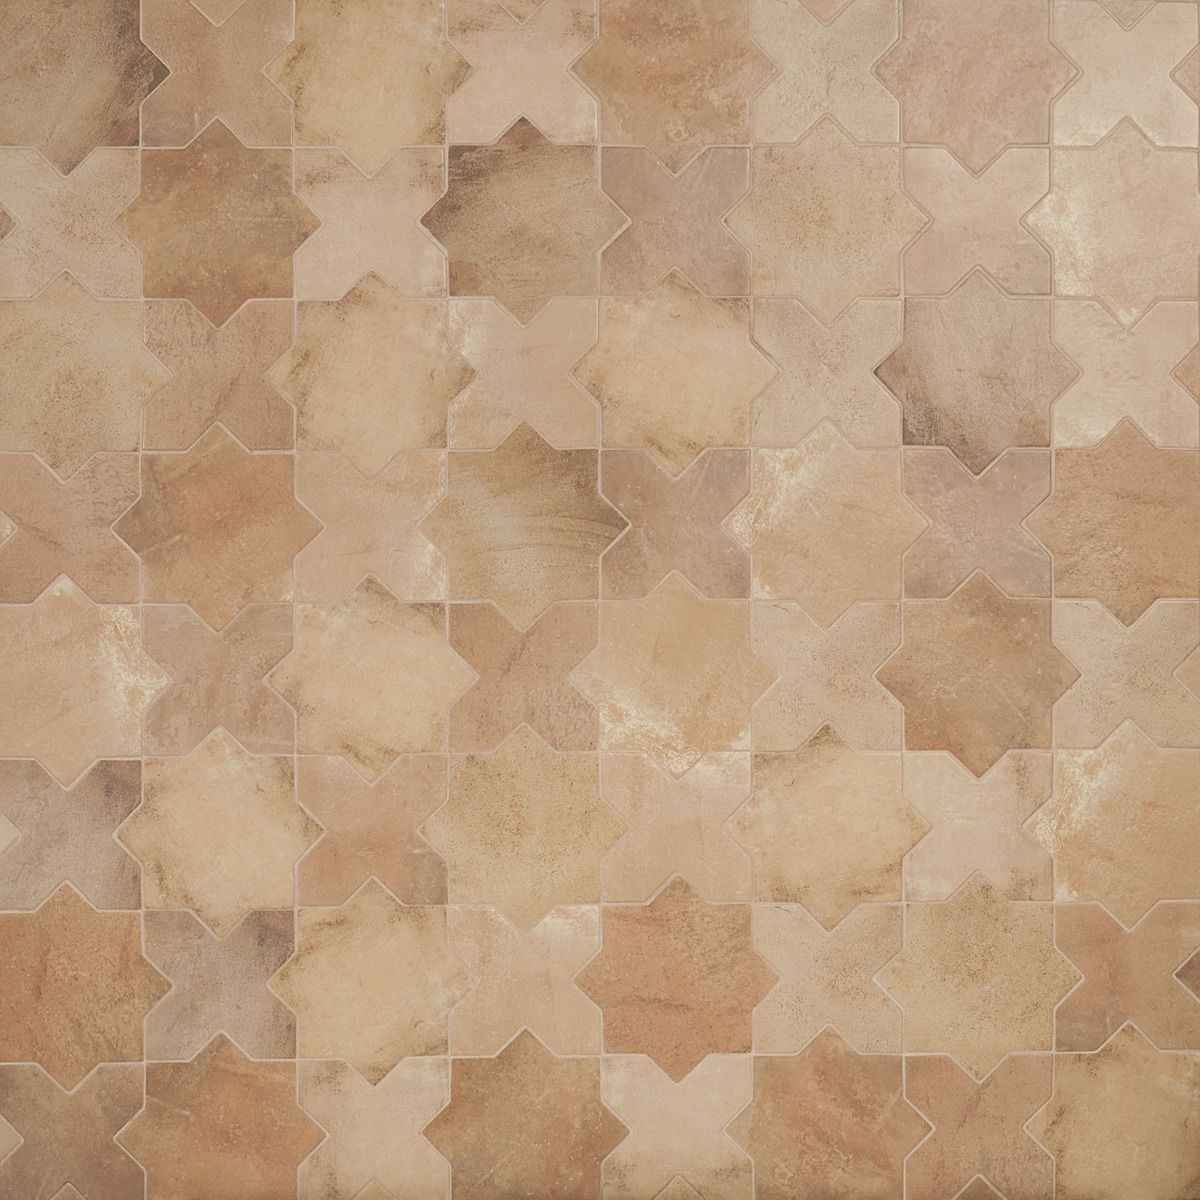 Parma Cotto Brown Matte Star and Cotto Brown Matte Cross 6" Terracotta Look Porcelain Tile